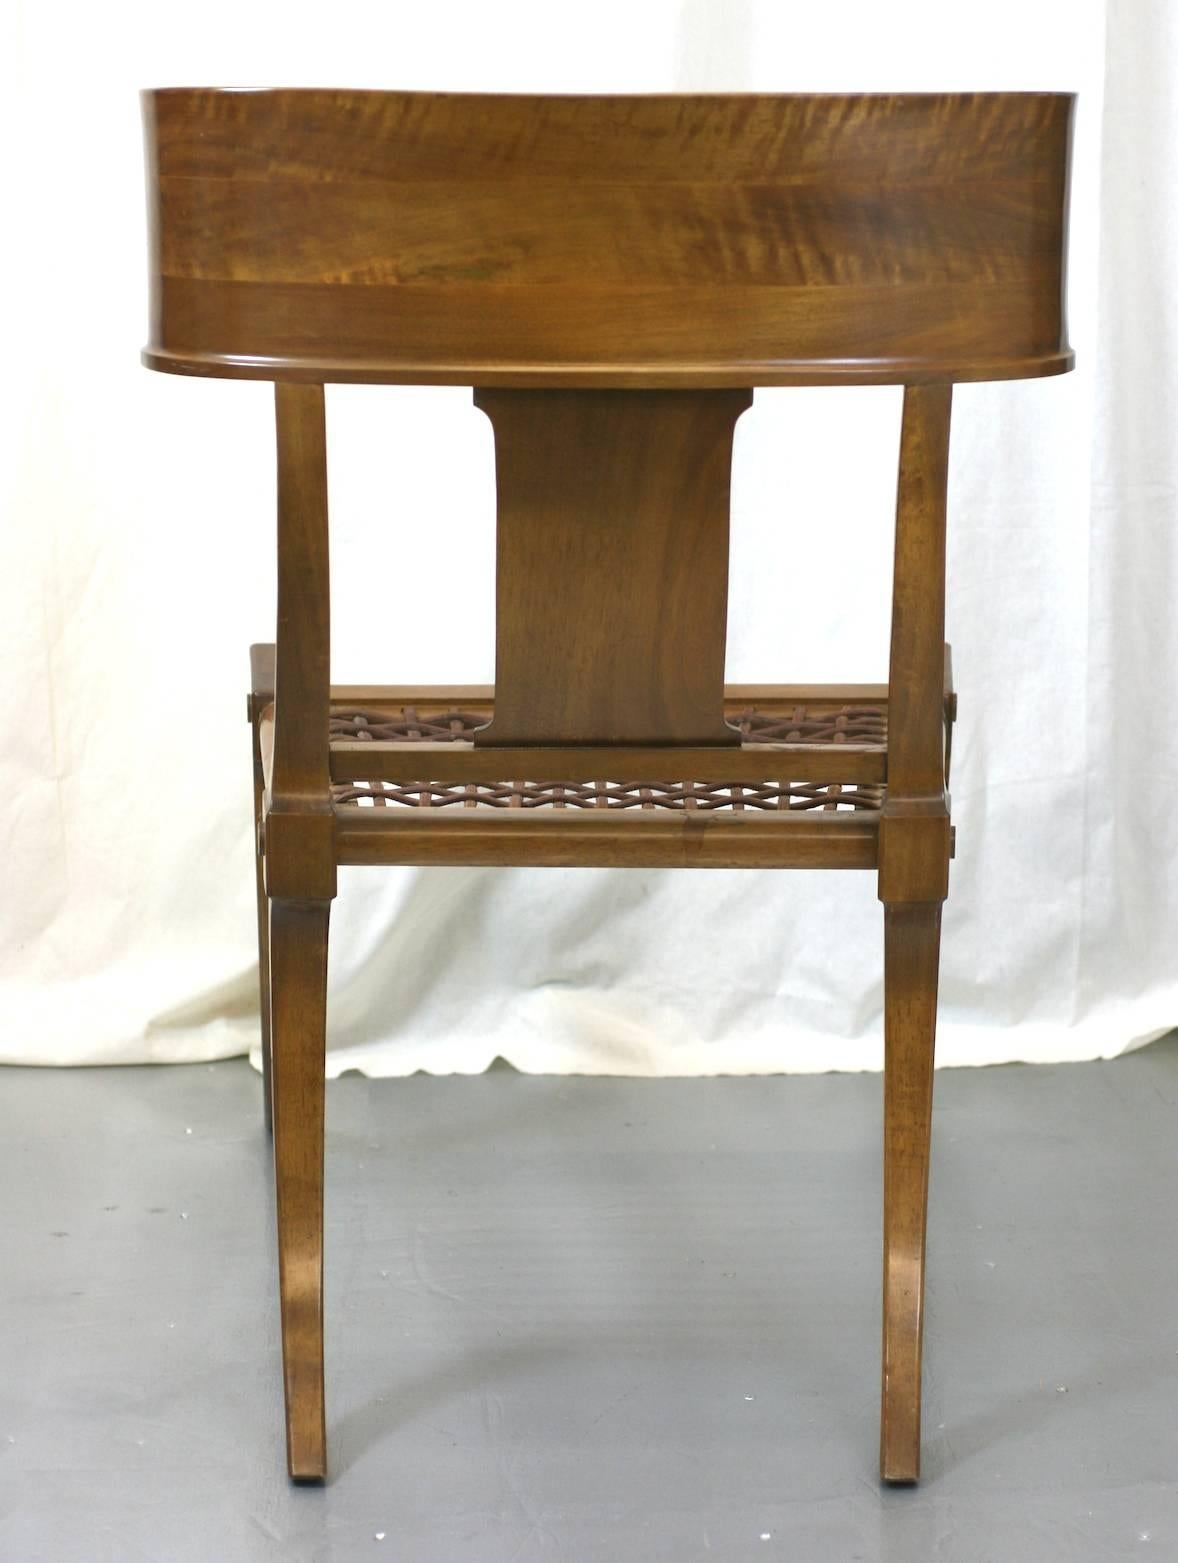 T.H. Robsjohn-Gibbings Klismos Chairs by Saridis, Athens In Excellent Condition For Sale In Riverdale, NY